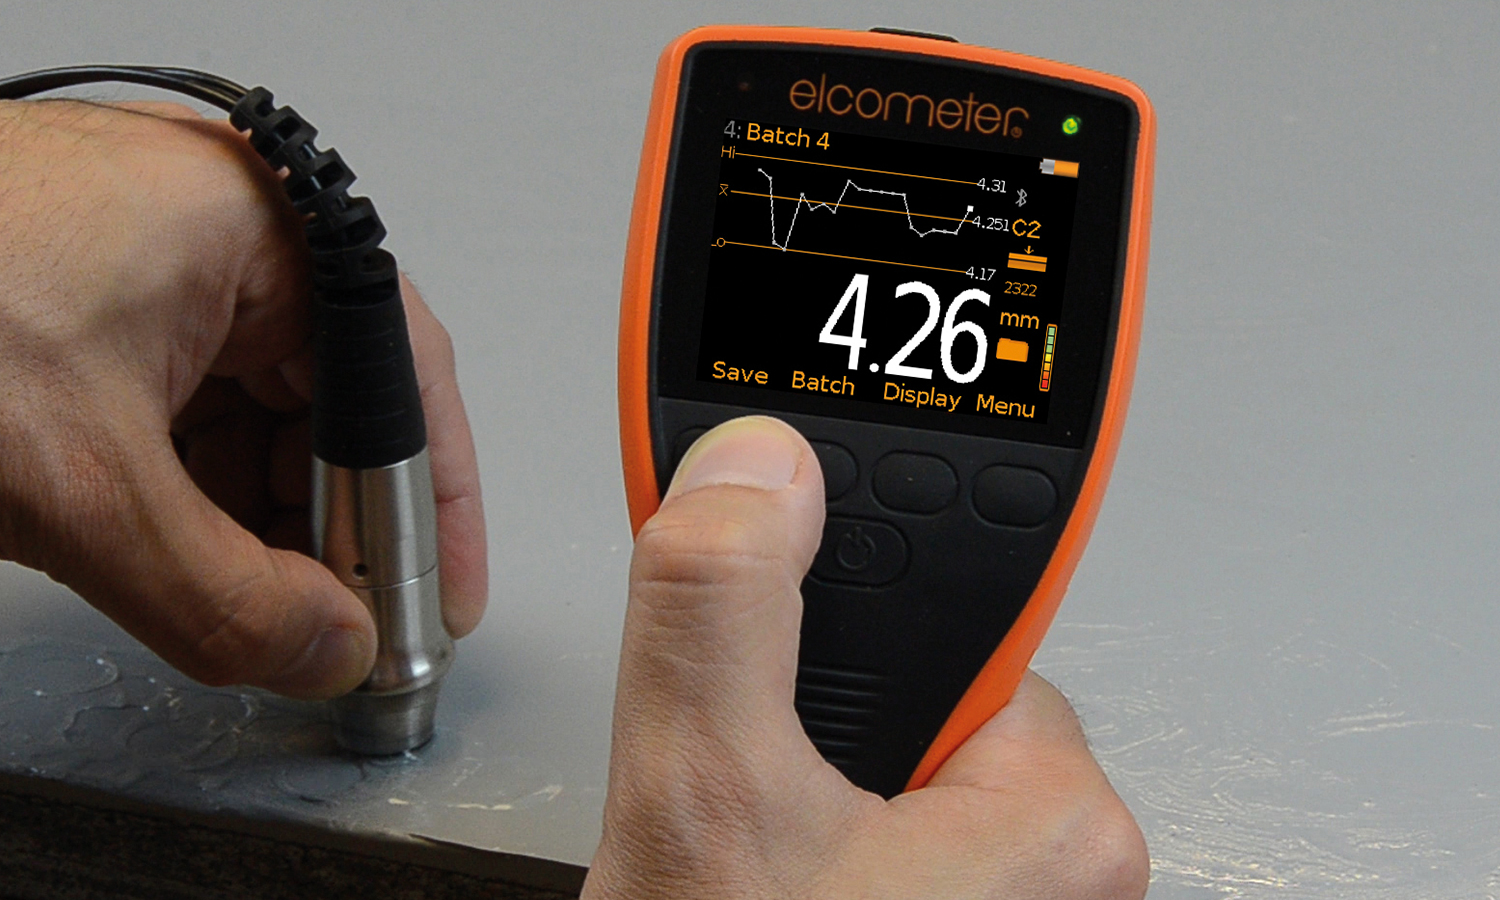 Elcometer 500 Concrete Coating Thickness Gauge taking readings